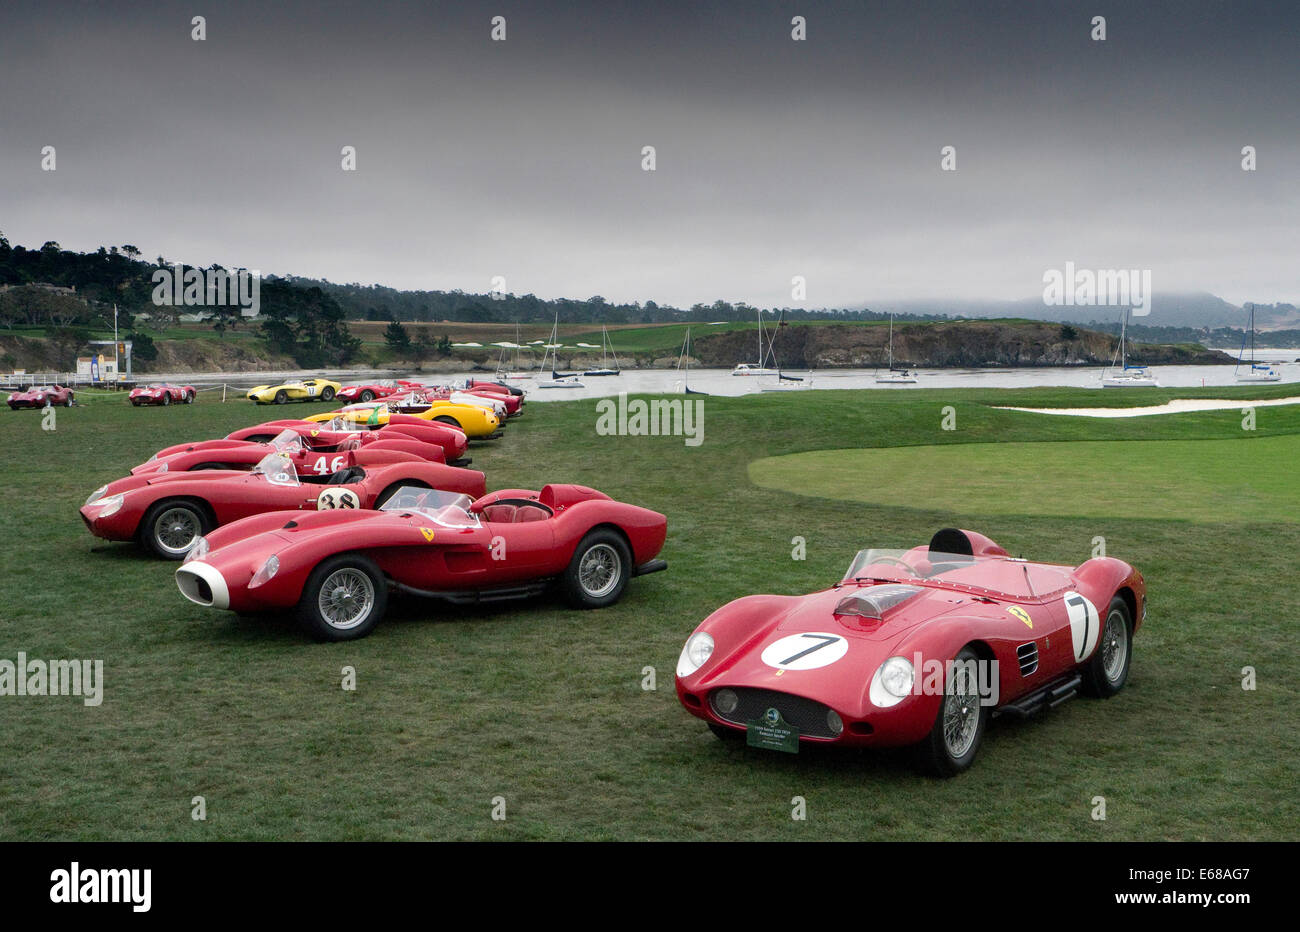 California, US. 17th Aug, 2014. Group of Ferrari Testa Rossa sports racing cars from 1950's and 60's gathered together on display at 2014 Pebble Beach Concours. Credit:  Martyn Goddard/Alamy Live News Stock Photo